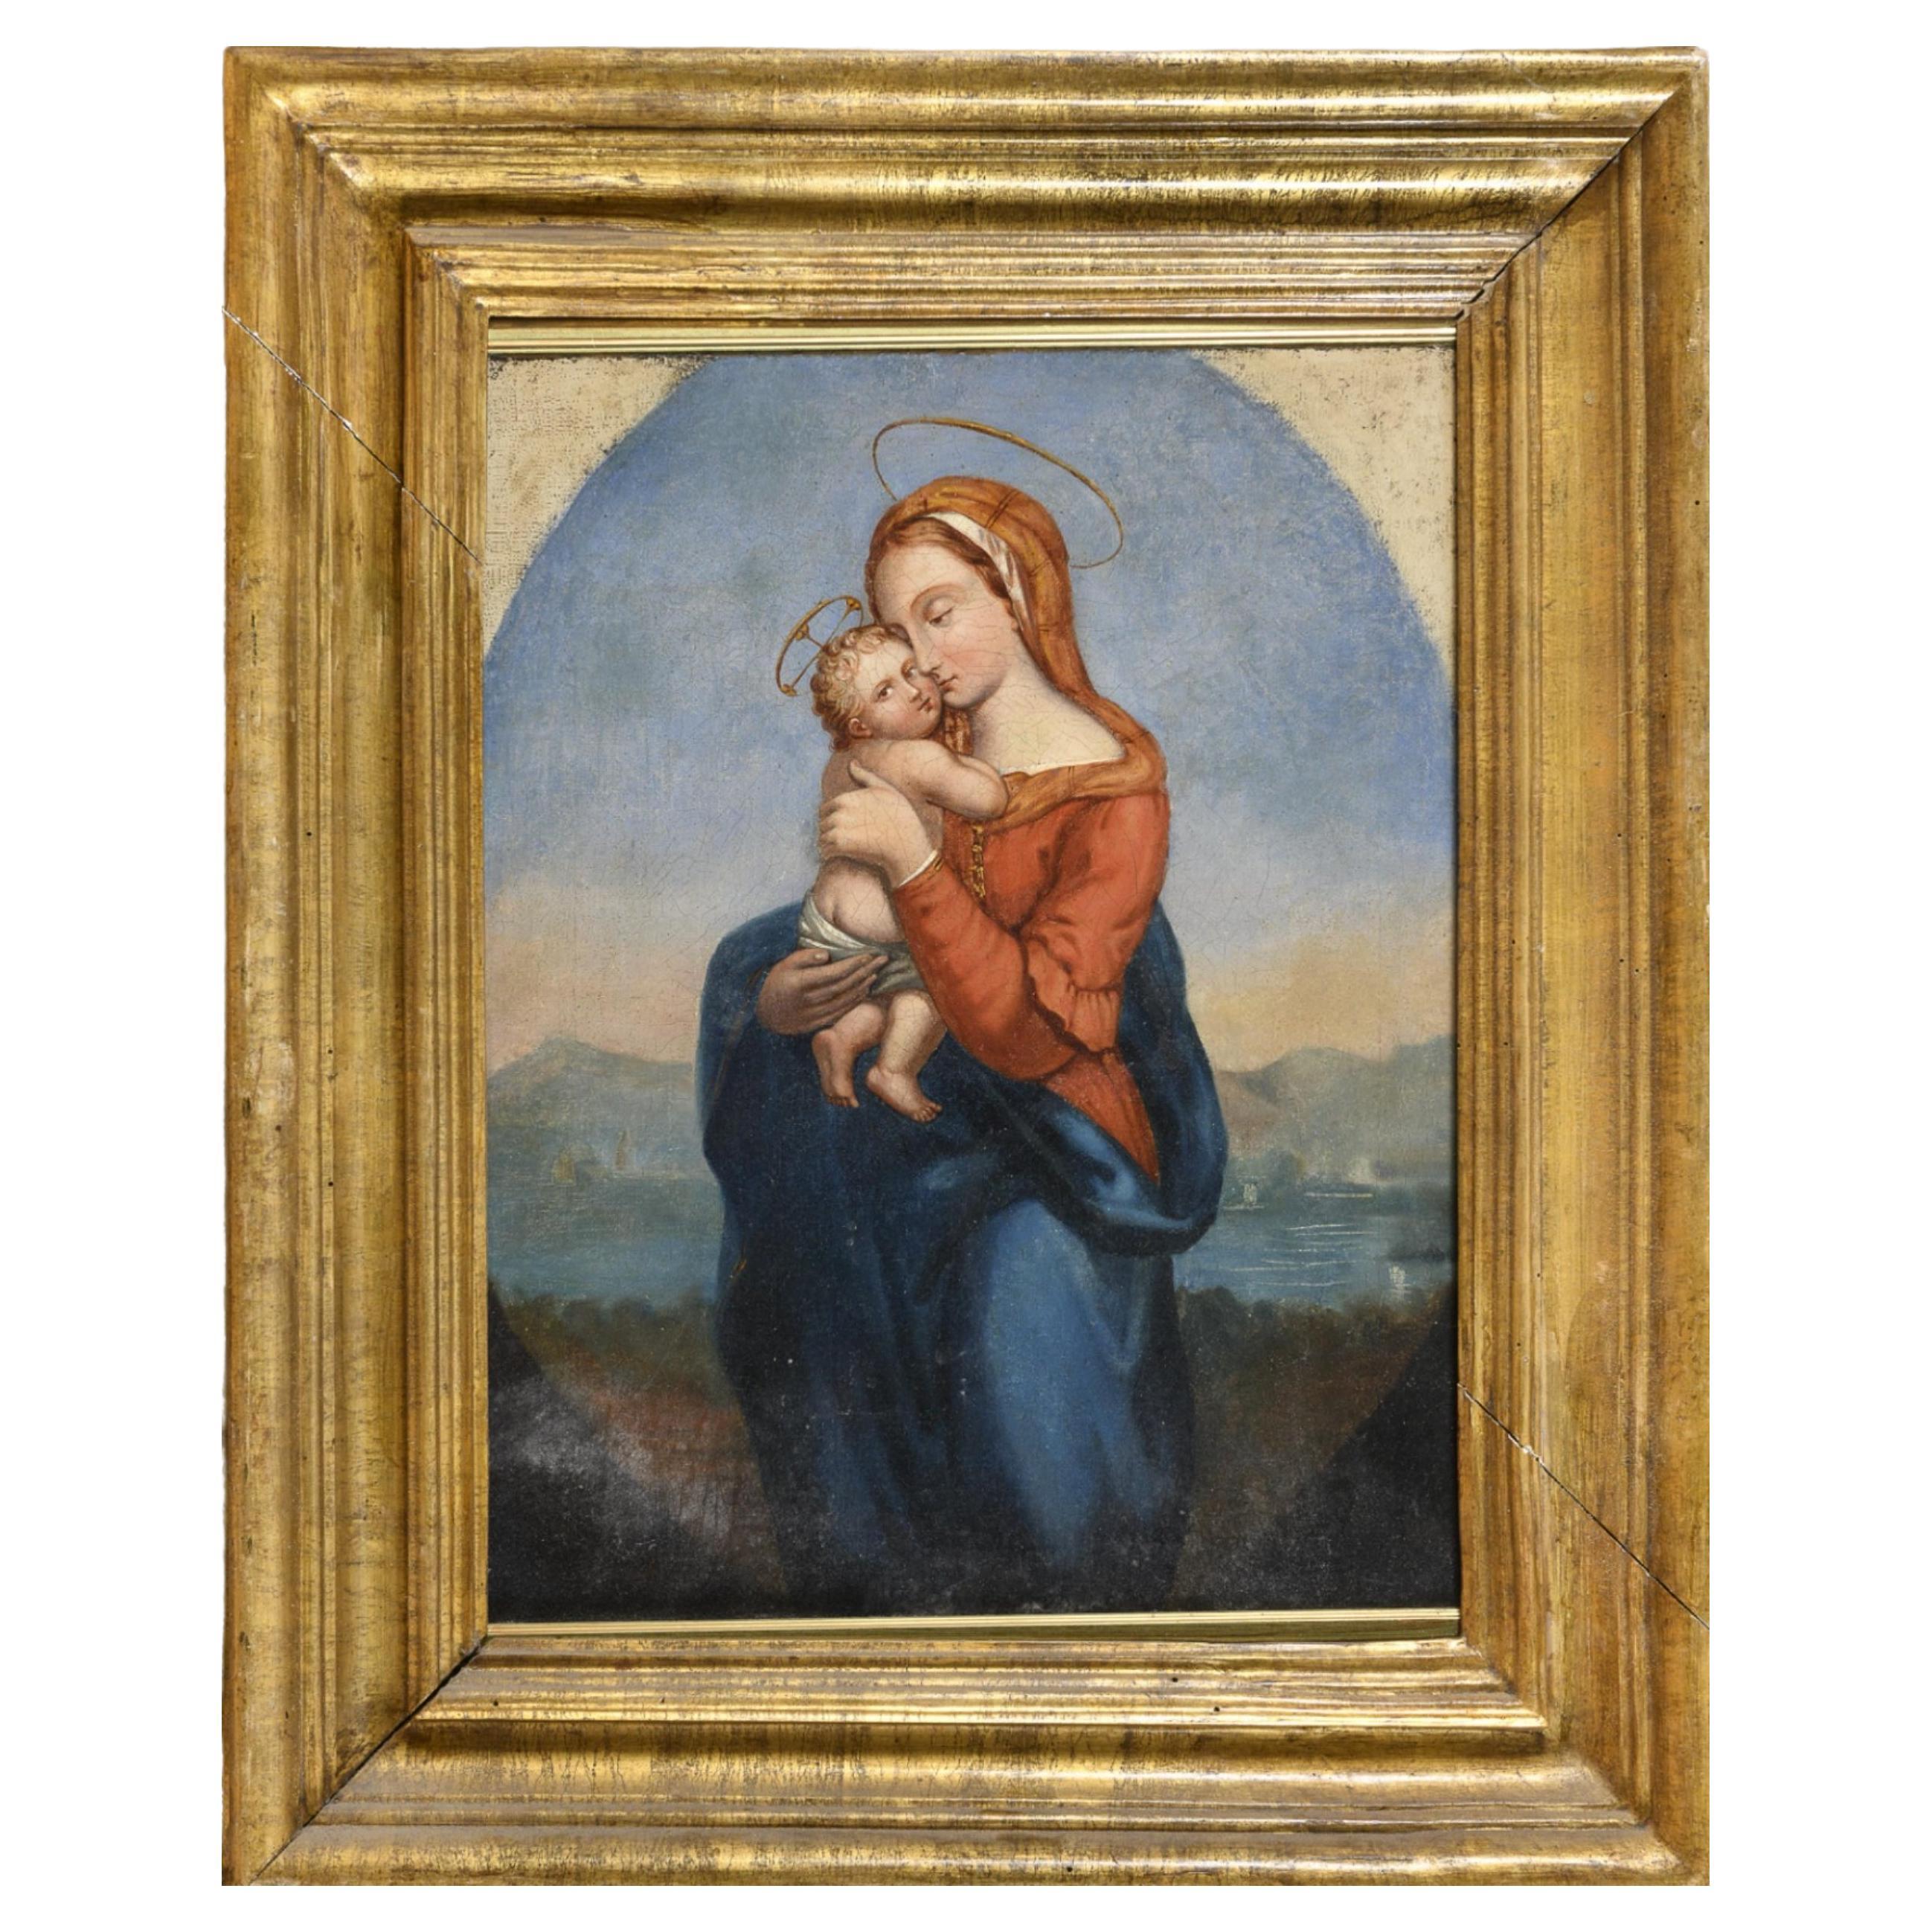 Italian School of the 18th Century Madonna with the Child